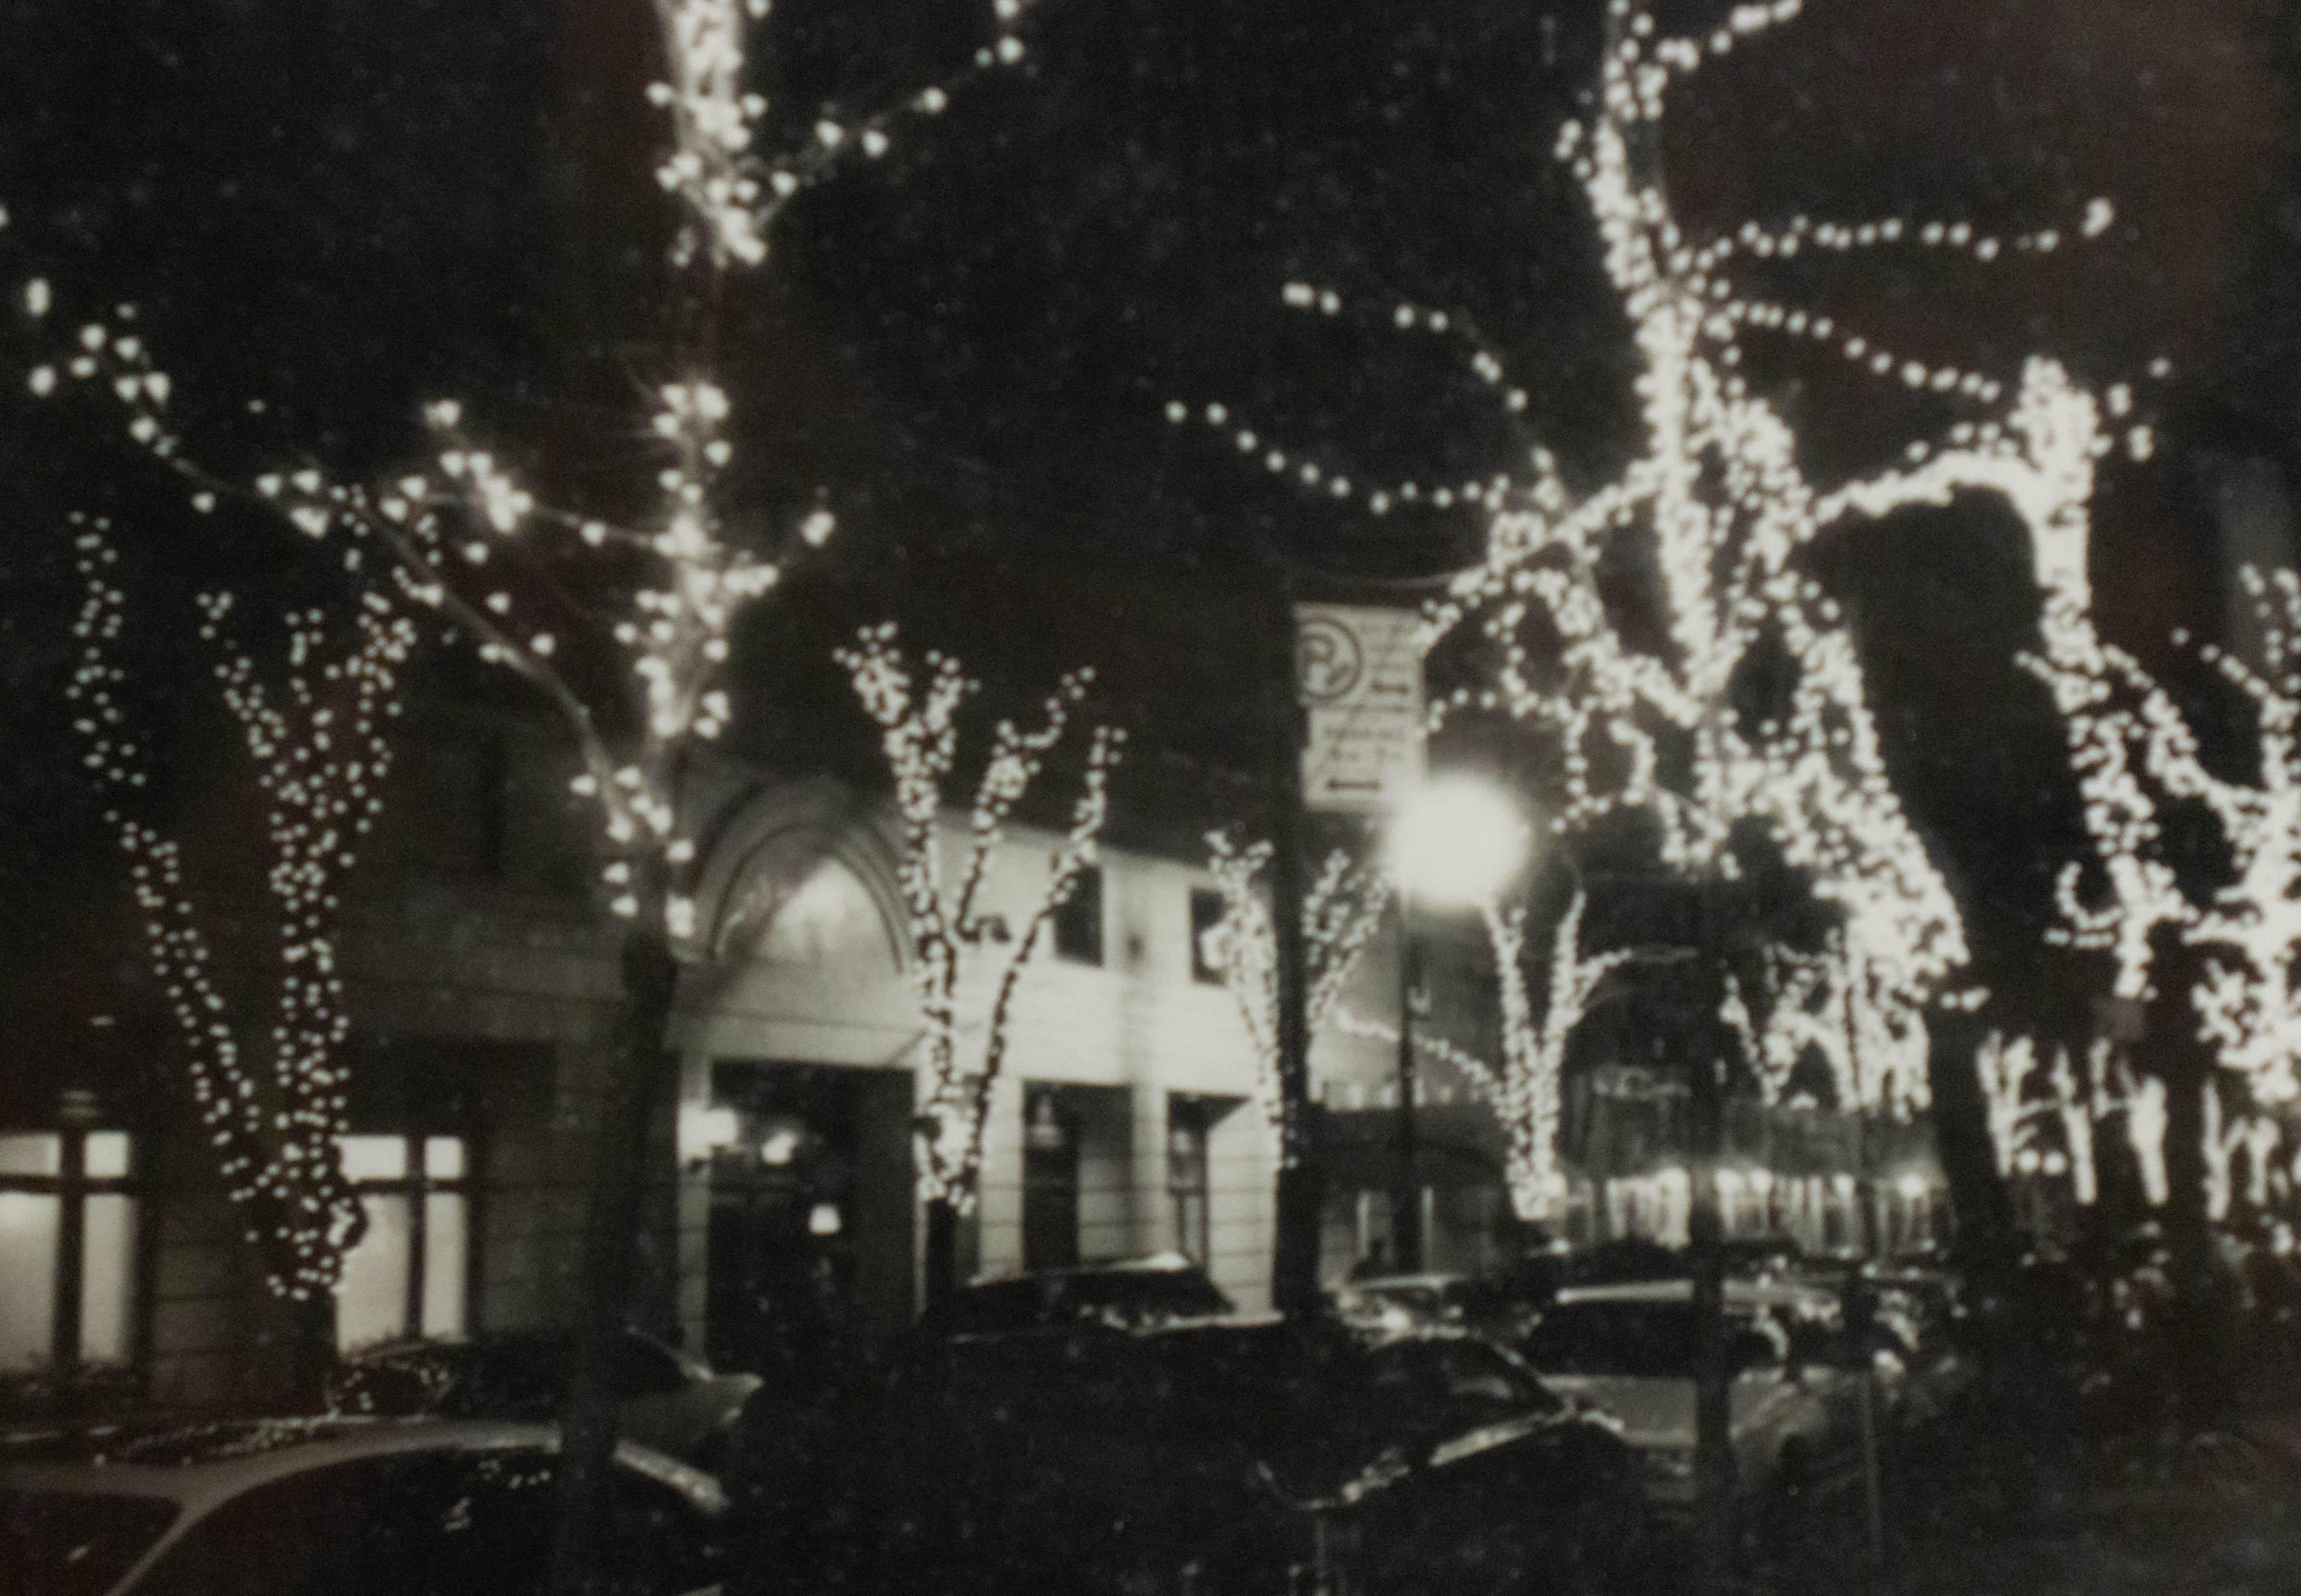 Black and white photograph in a black frame of a street scene with festive lights strung in trees. Photography by Shelley Harrison.
  